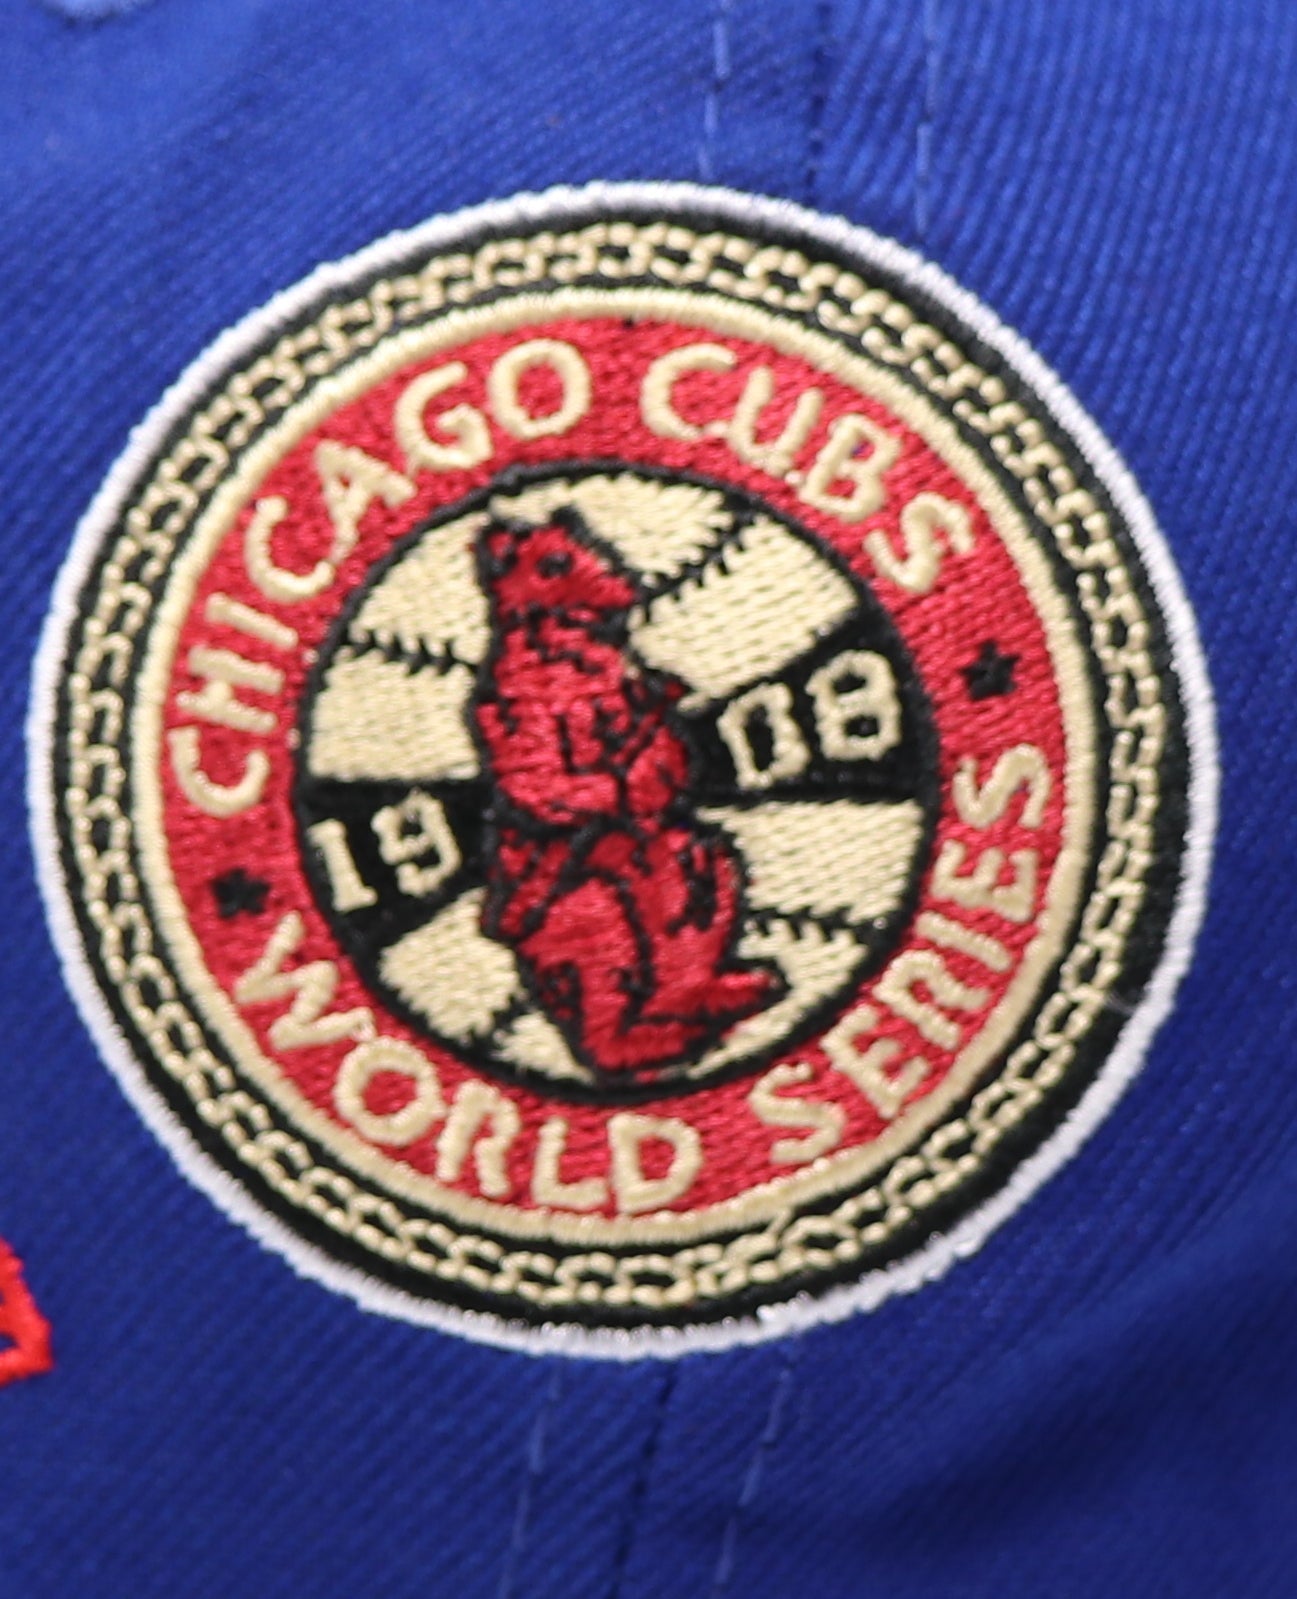 CHICAGO CUBS "COUNT THE RINGS" NEW ERA 59FIFTY FITTED